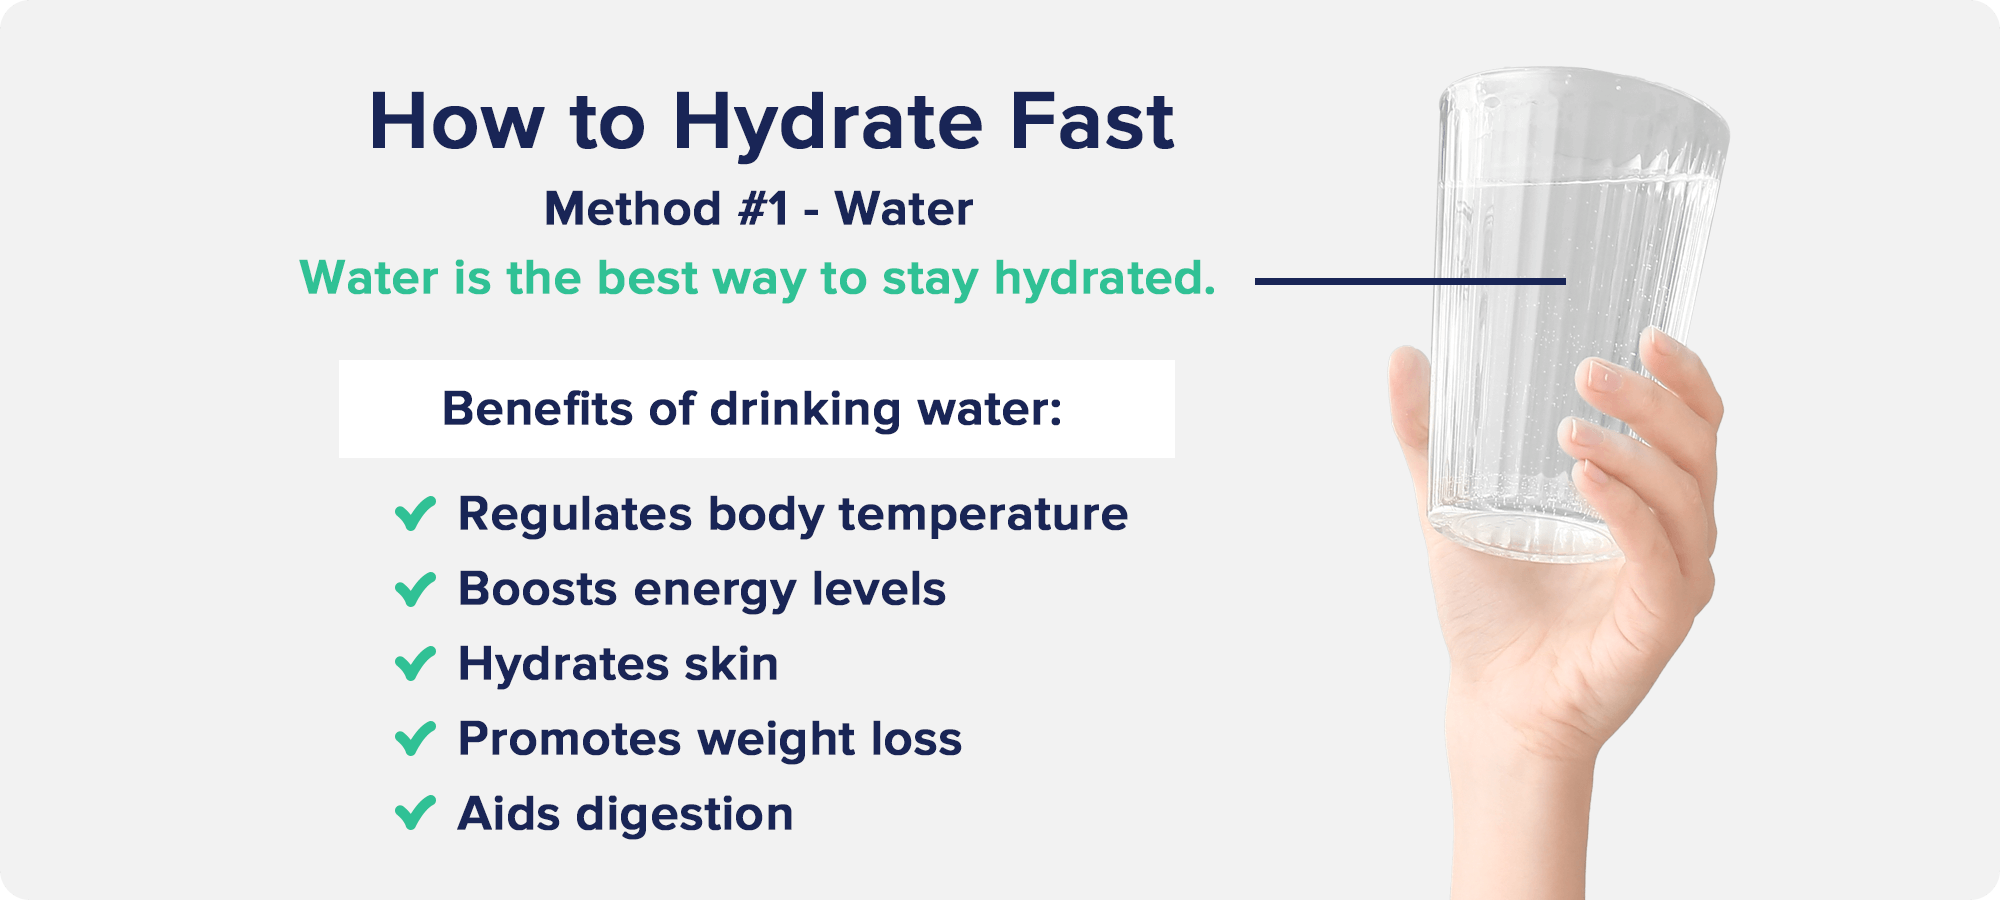 How to Hydrate Fast: Method #1